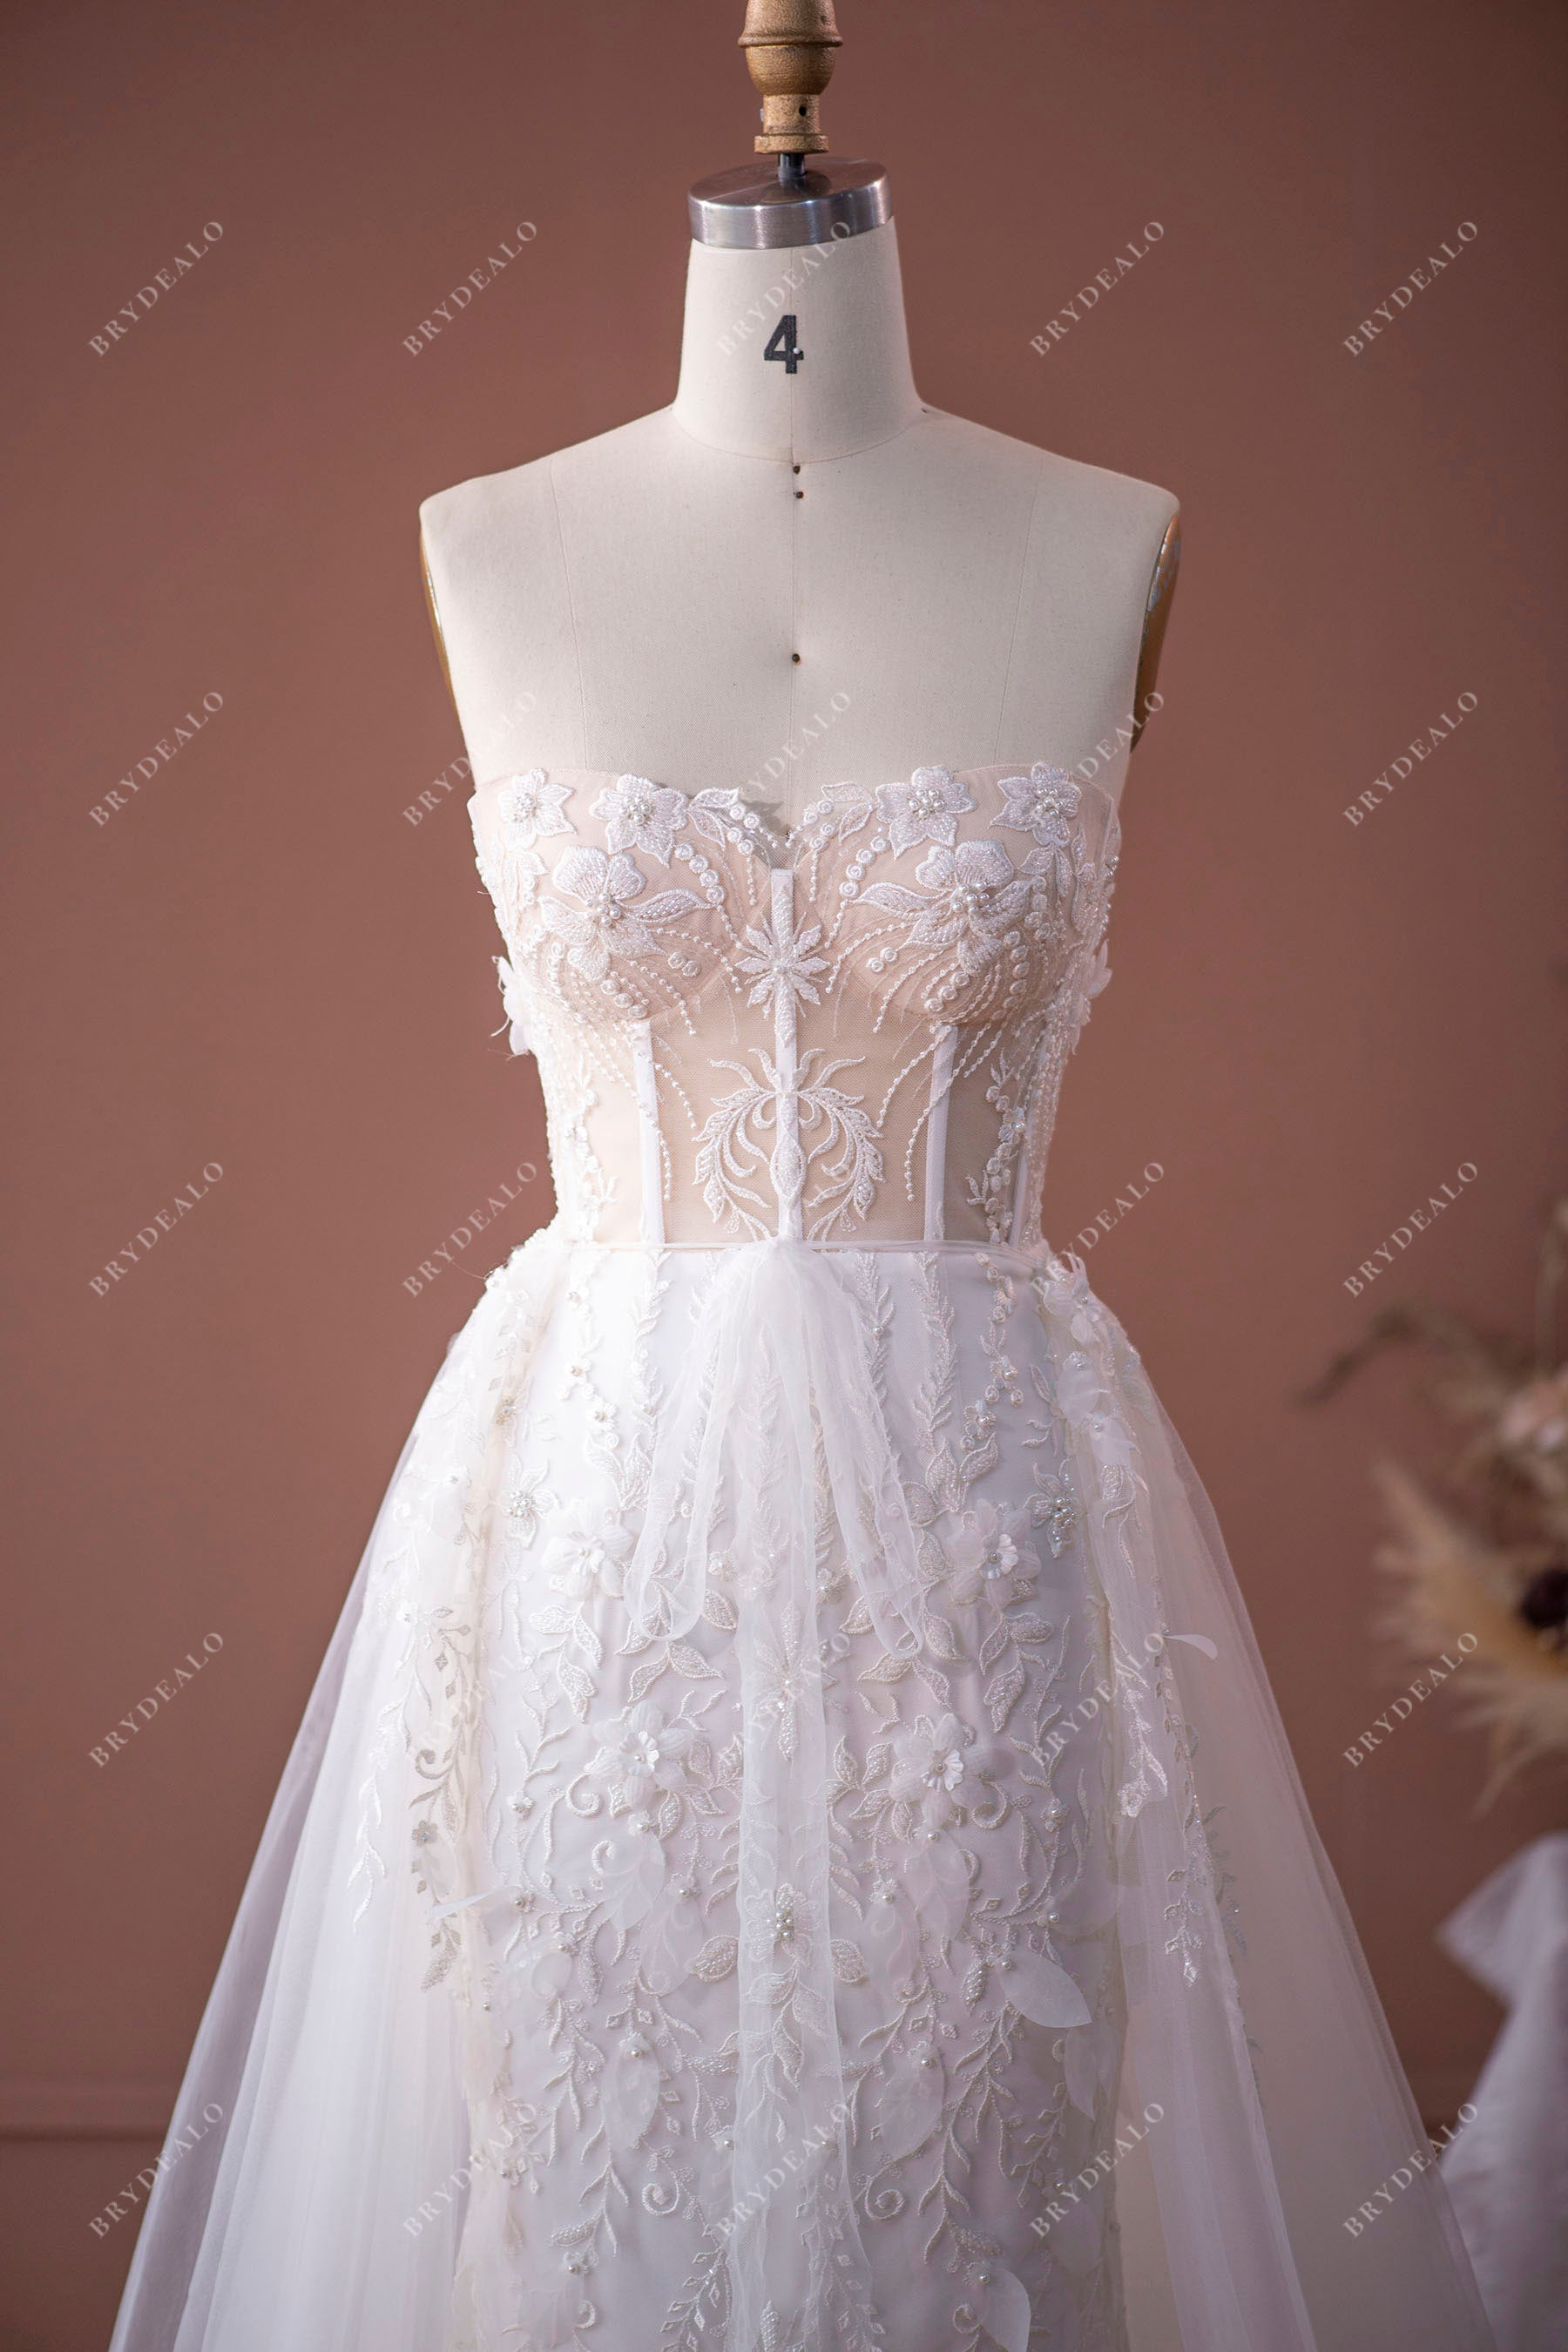 sweetheart neck strapless corset lace bridal gown